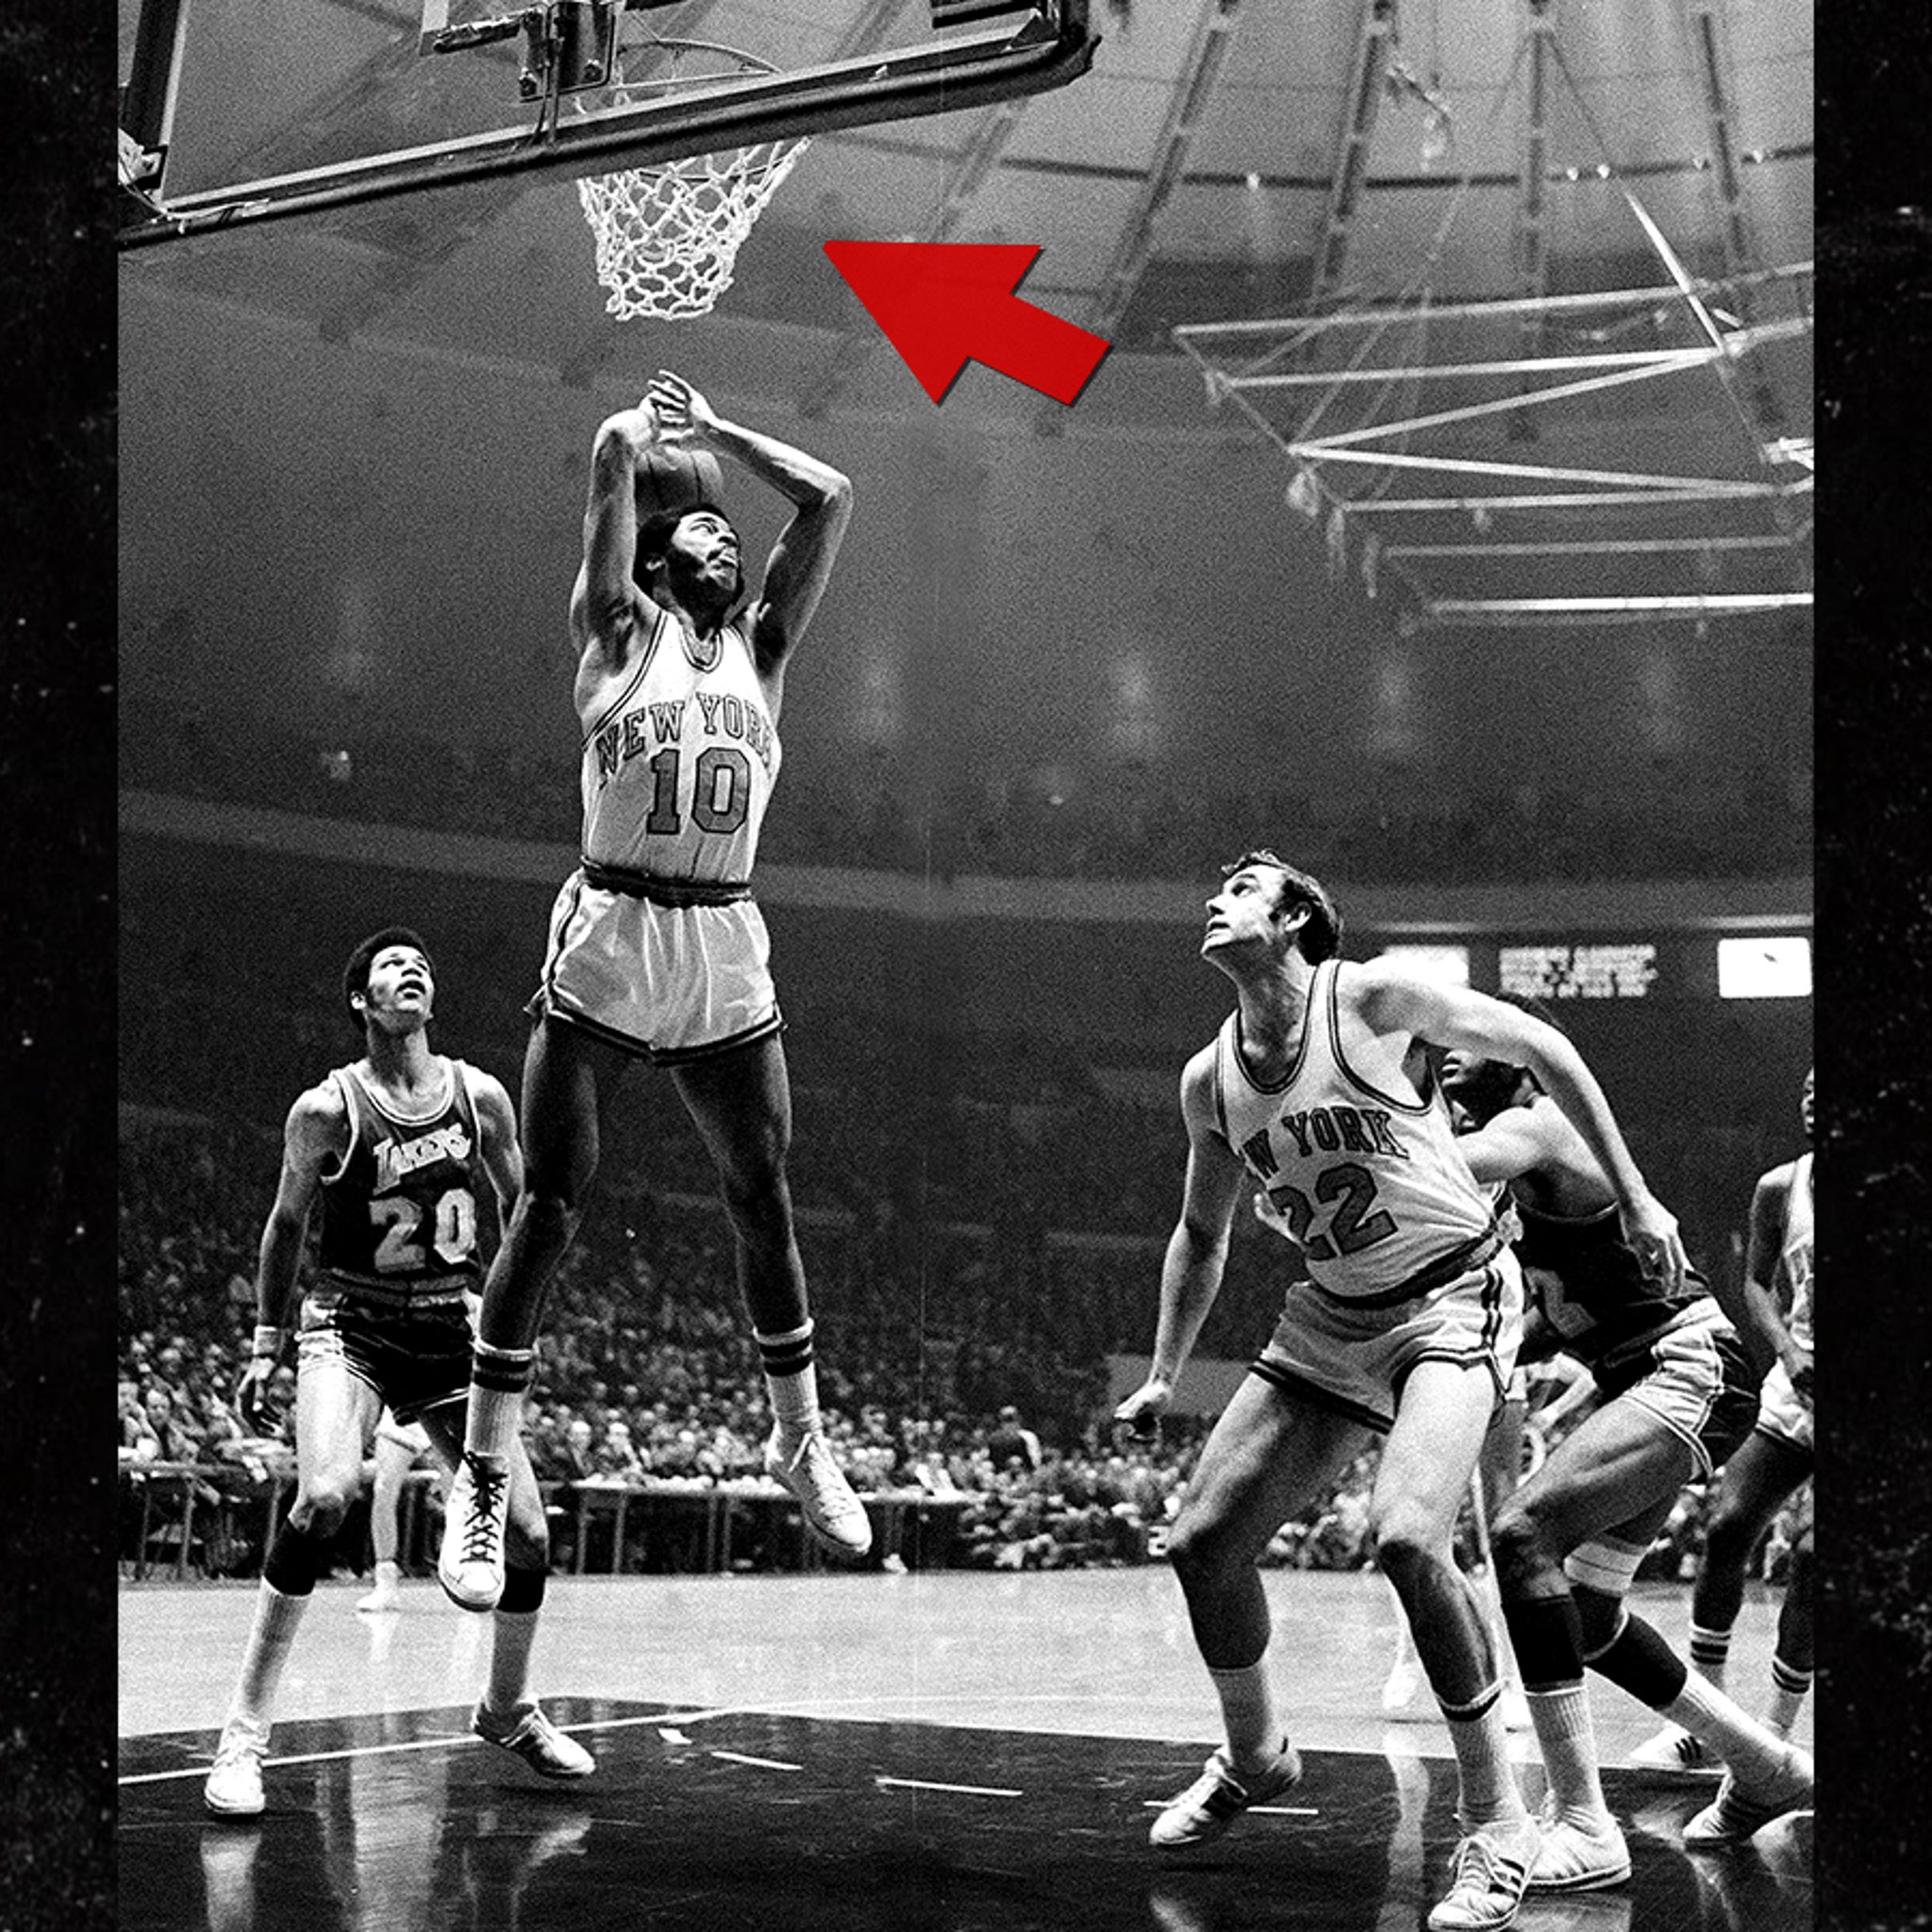 Flipboard: Net From Willis Reed's Miraculous 1970 NBA Finals Game 7 Comeback For Auction